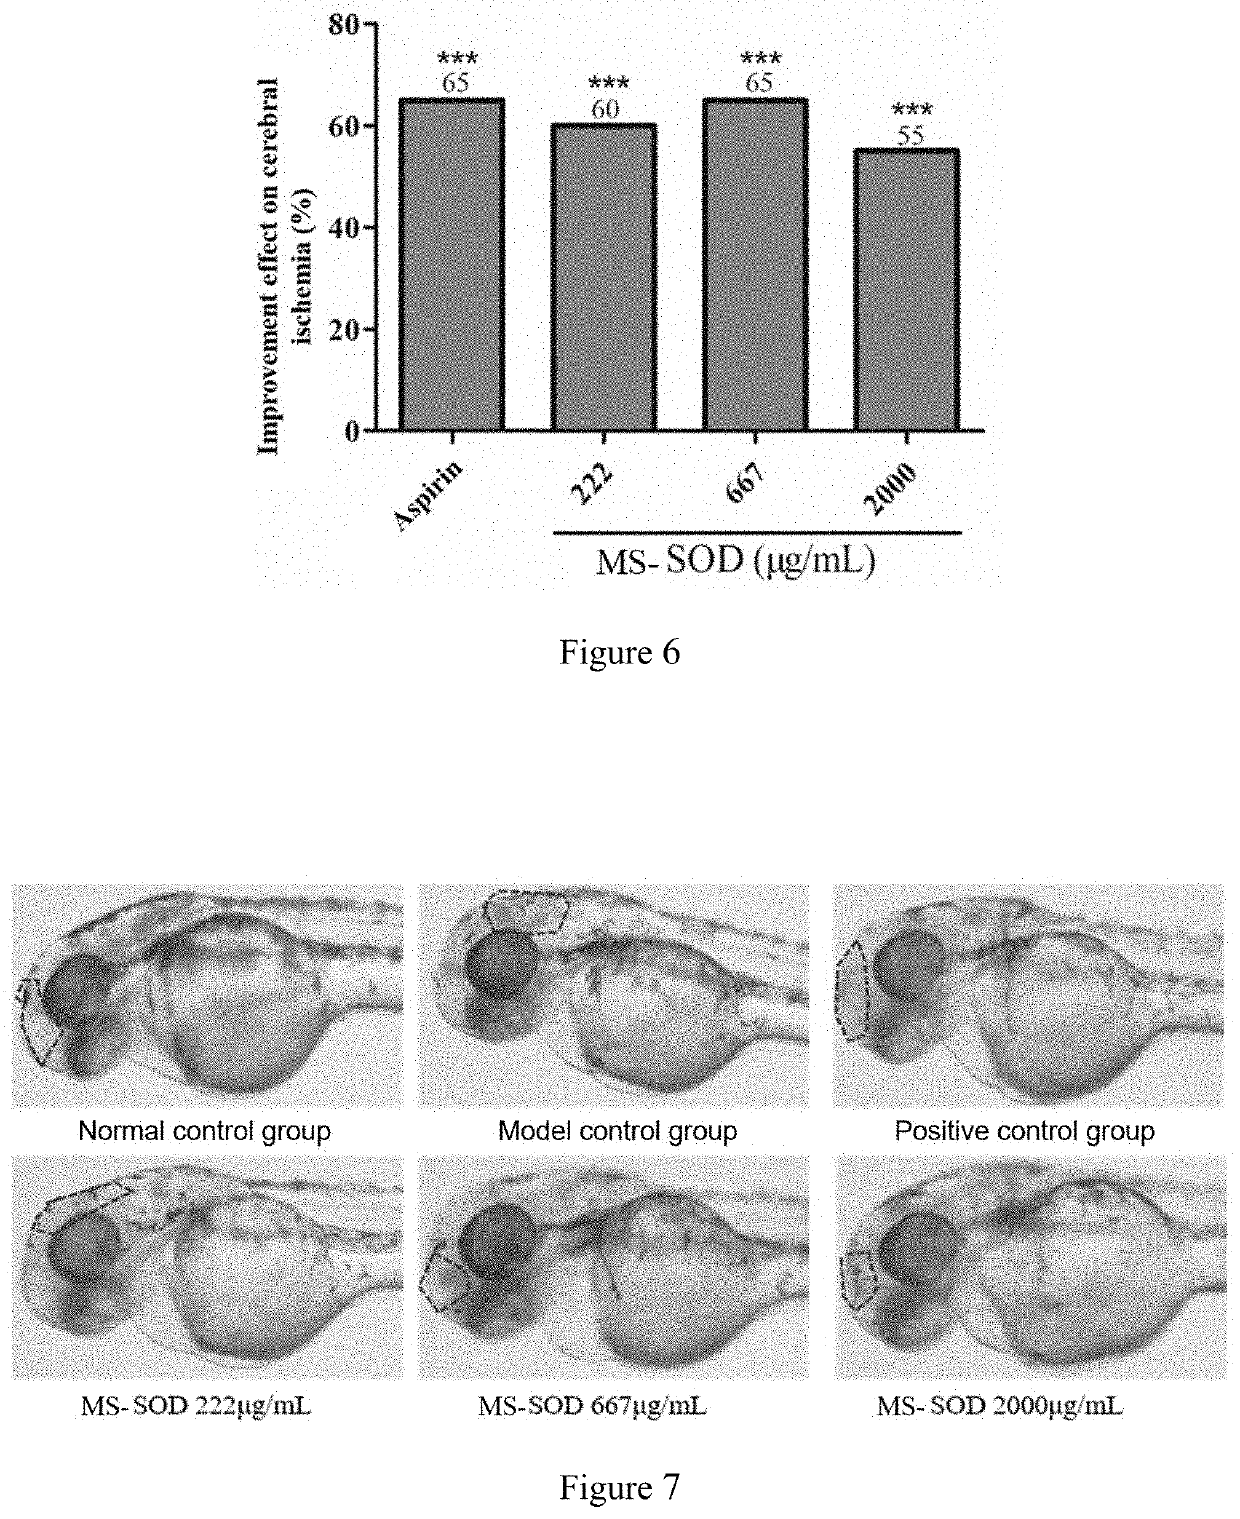 Use of a manganese superoxide dismutase with high stability in the prevention or treatment of cerebral stroke